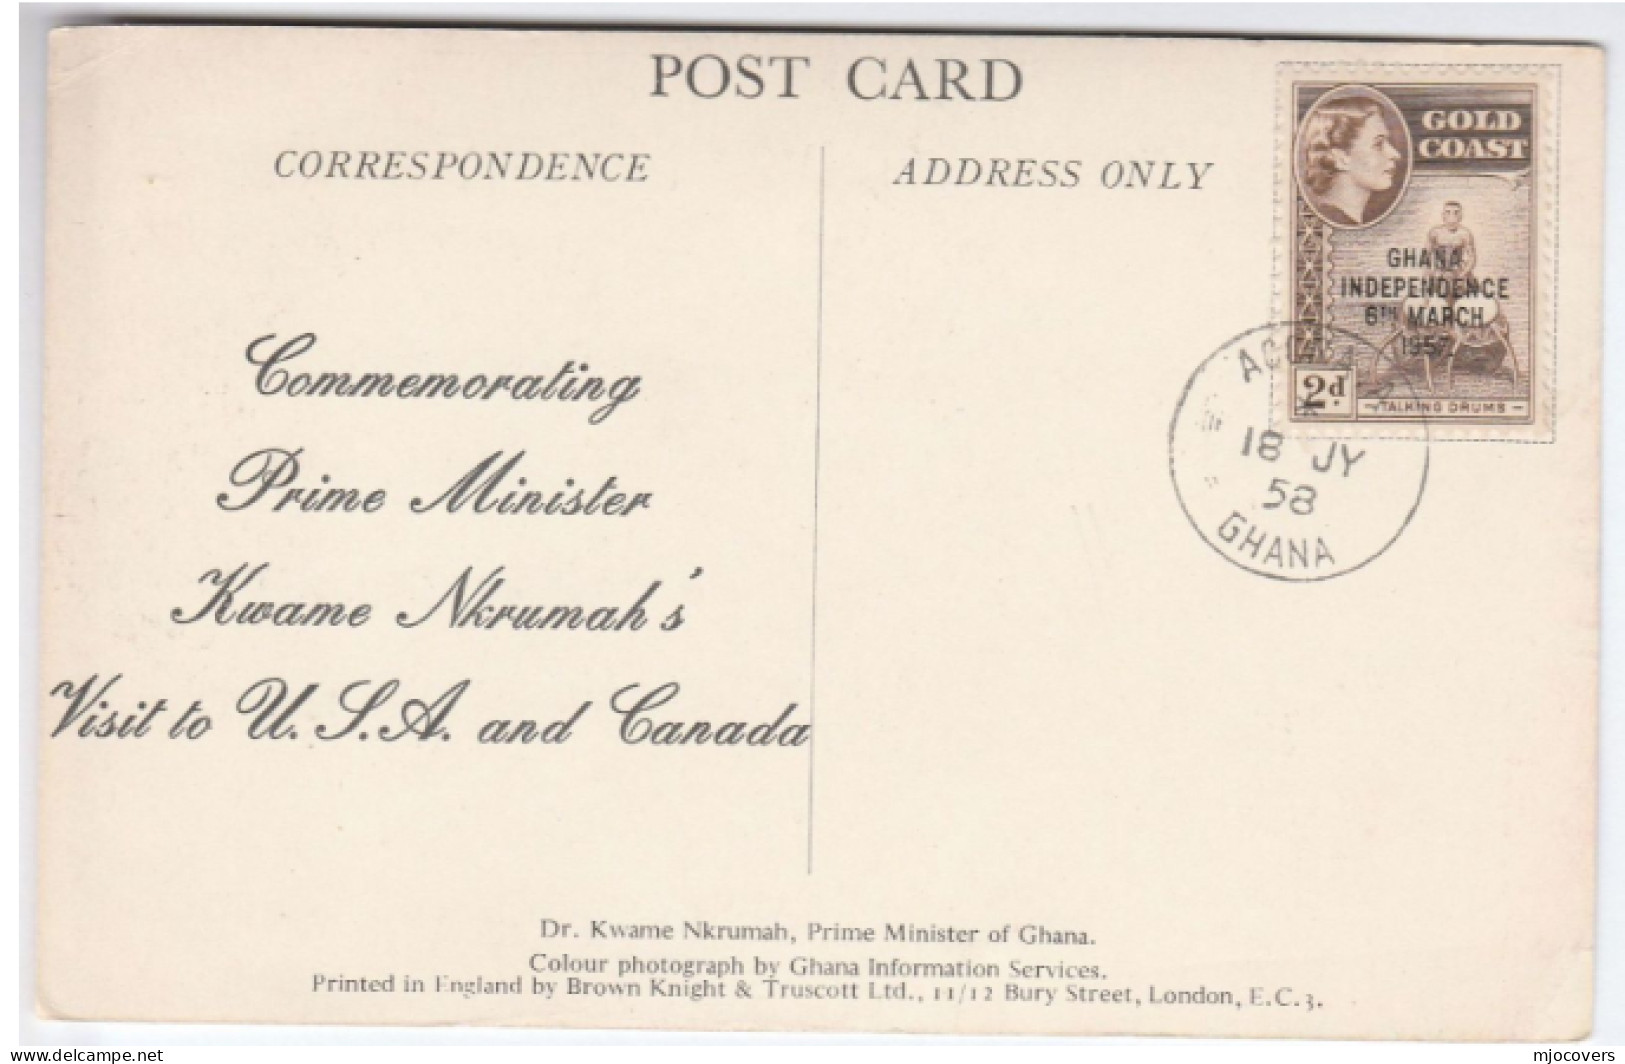 1958  GOLD COAST EVENT Prime Minister NKRUMAH  Visits Canada Cover Stamps Postcard - Ghana - Gold Coast